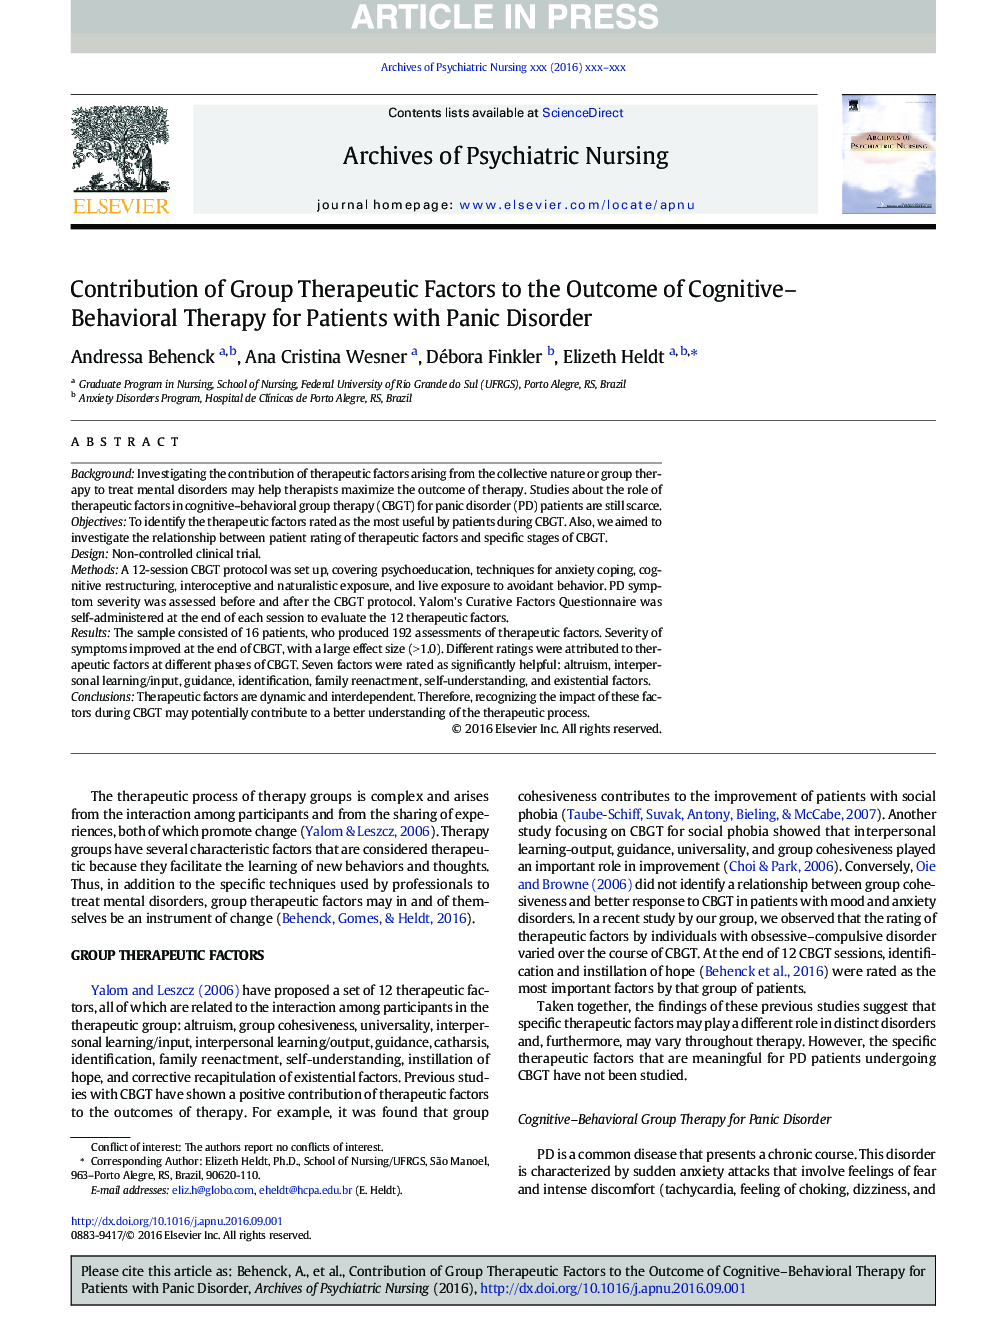 Contribution of Group Therapeutic Factors to the Outcome of Cognitive-Behavioral Therapy for Patients with Panic Disorder